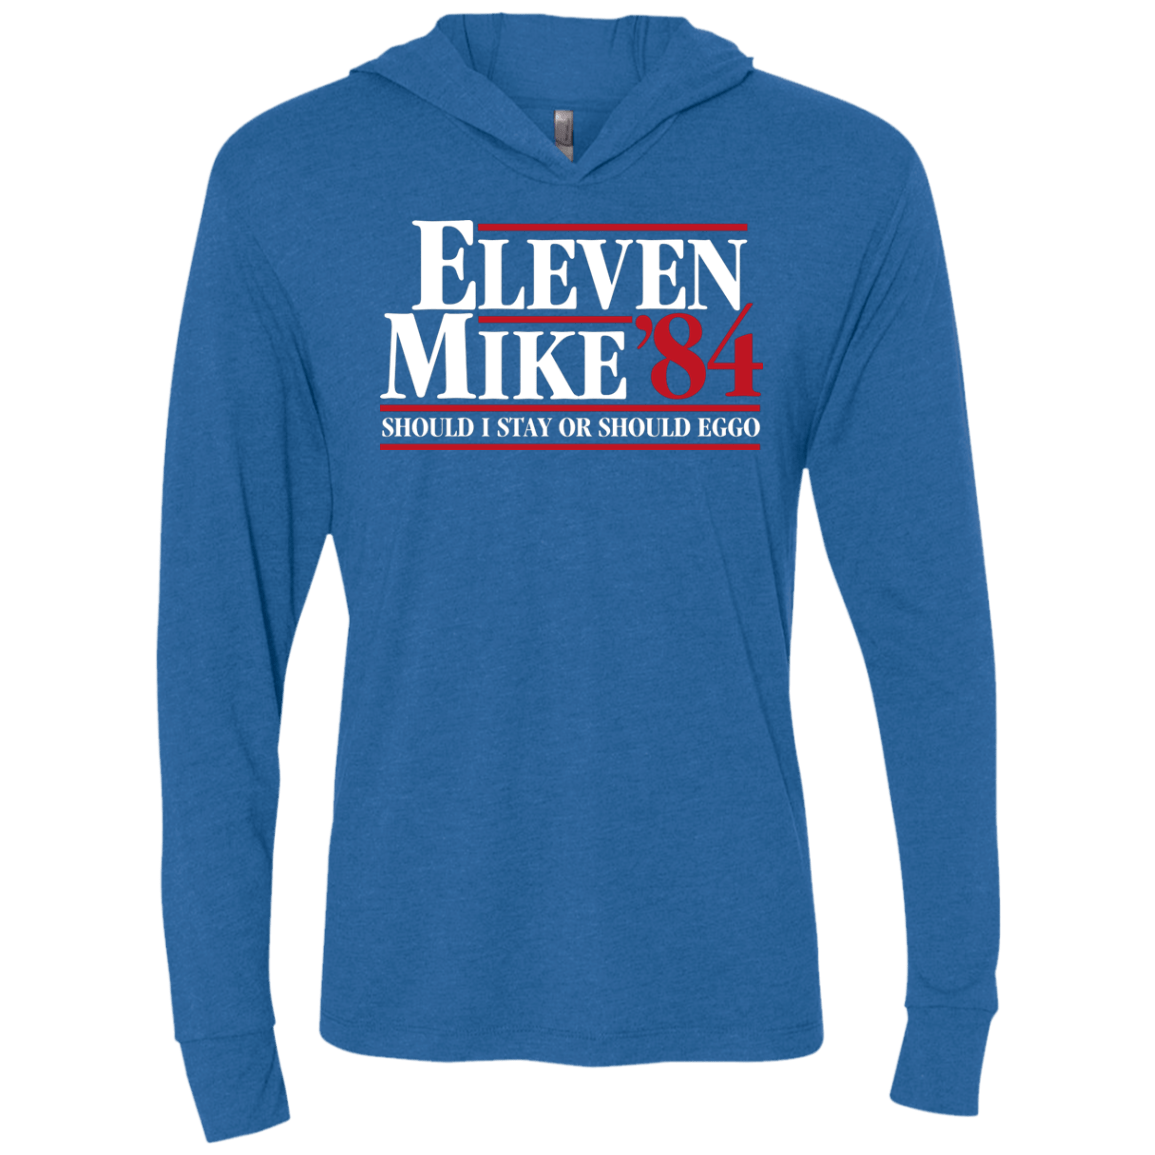 T-Shirts Vintage Royal / X-Small Eleven Mike 84 - Should I Stay or Should Eggo Triblend Long Sleeve Hoodie Tee